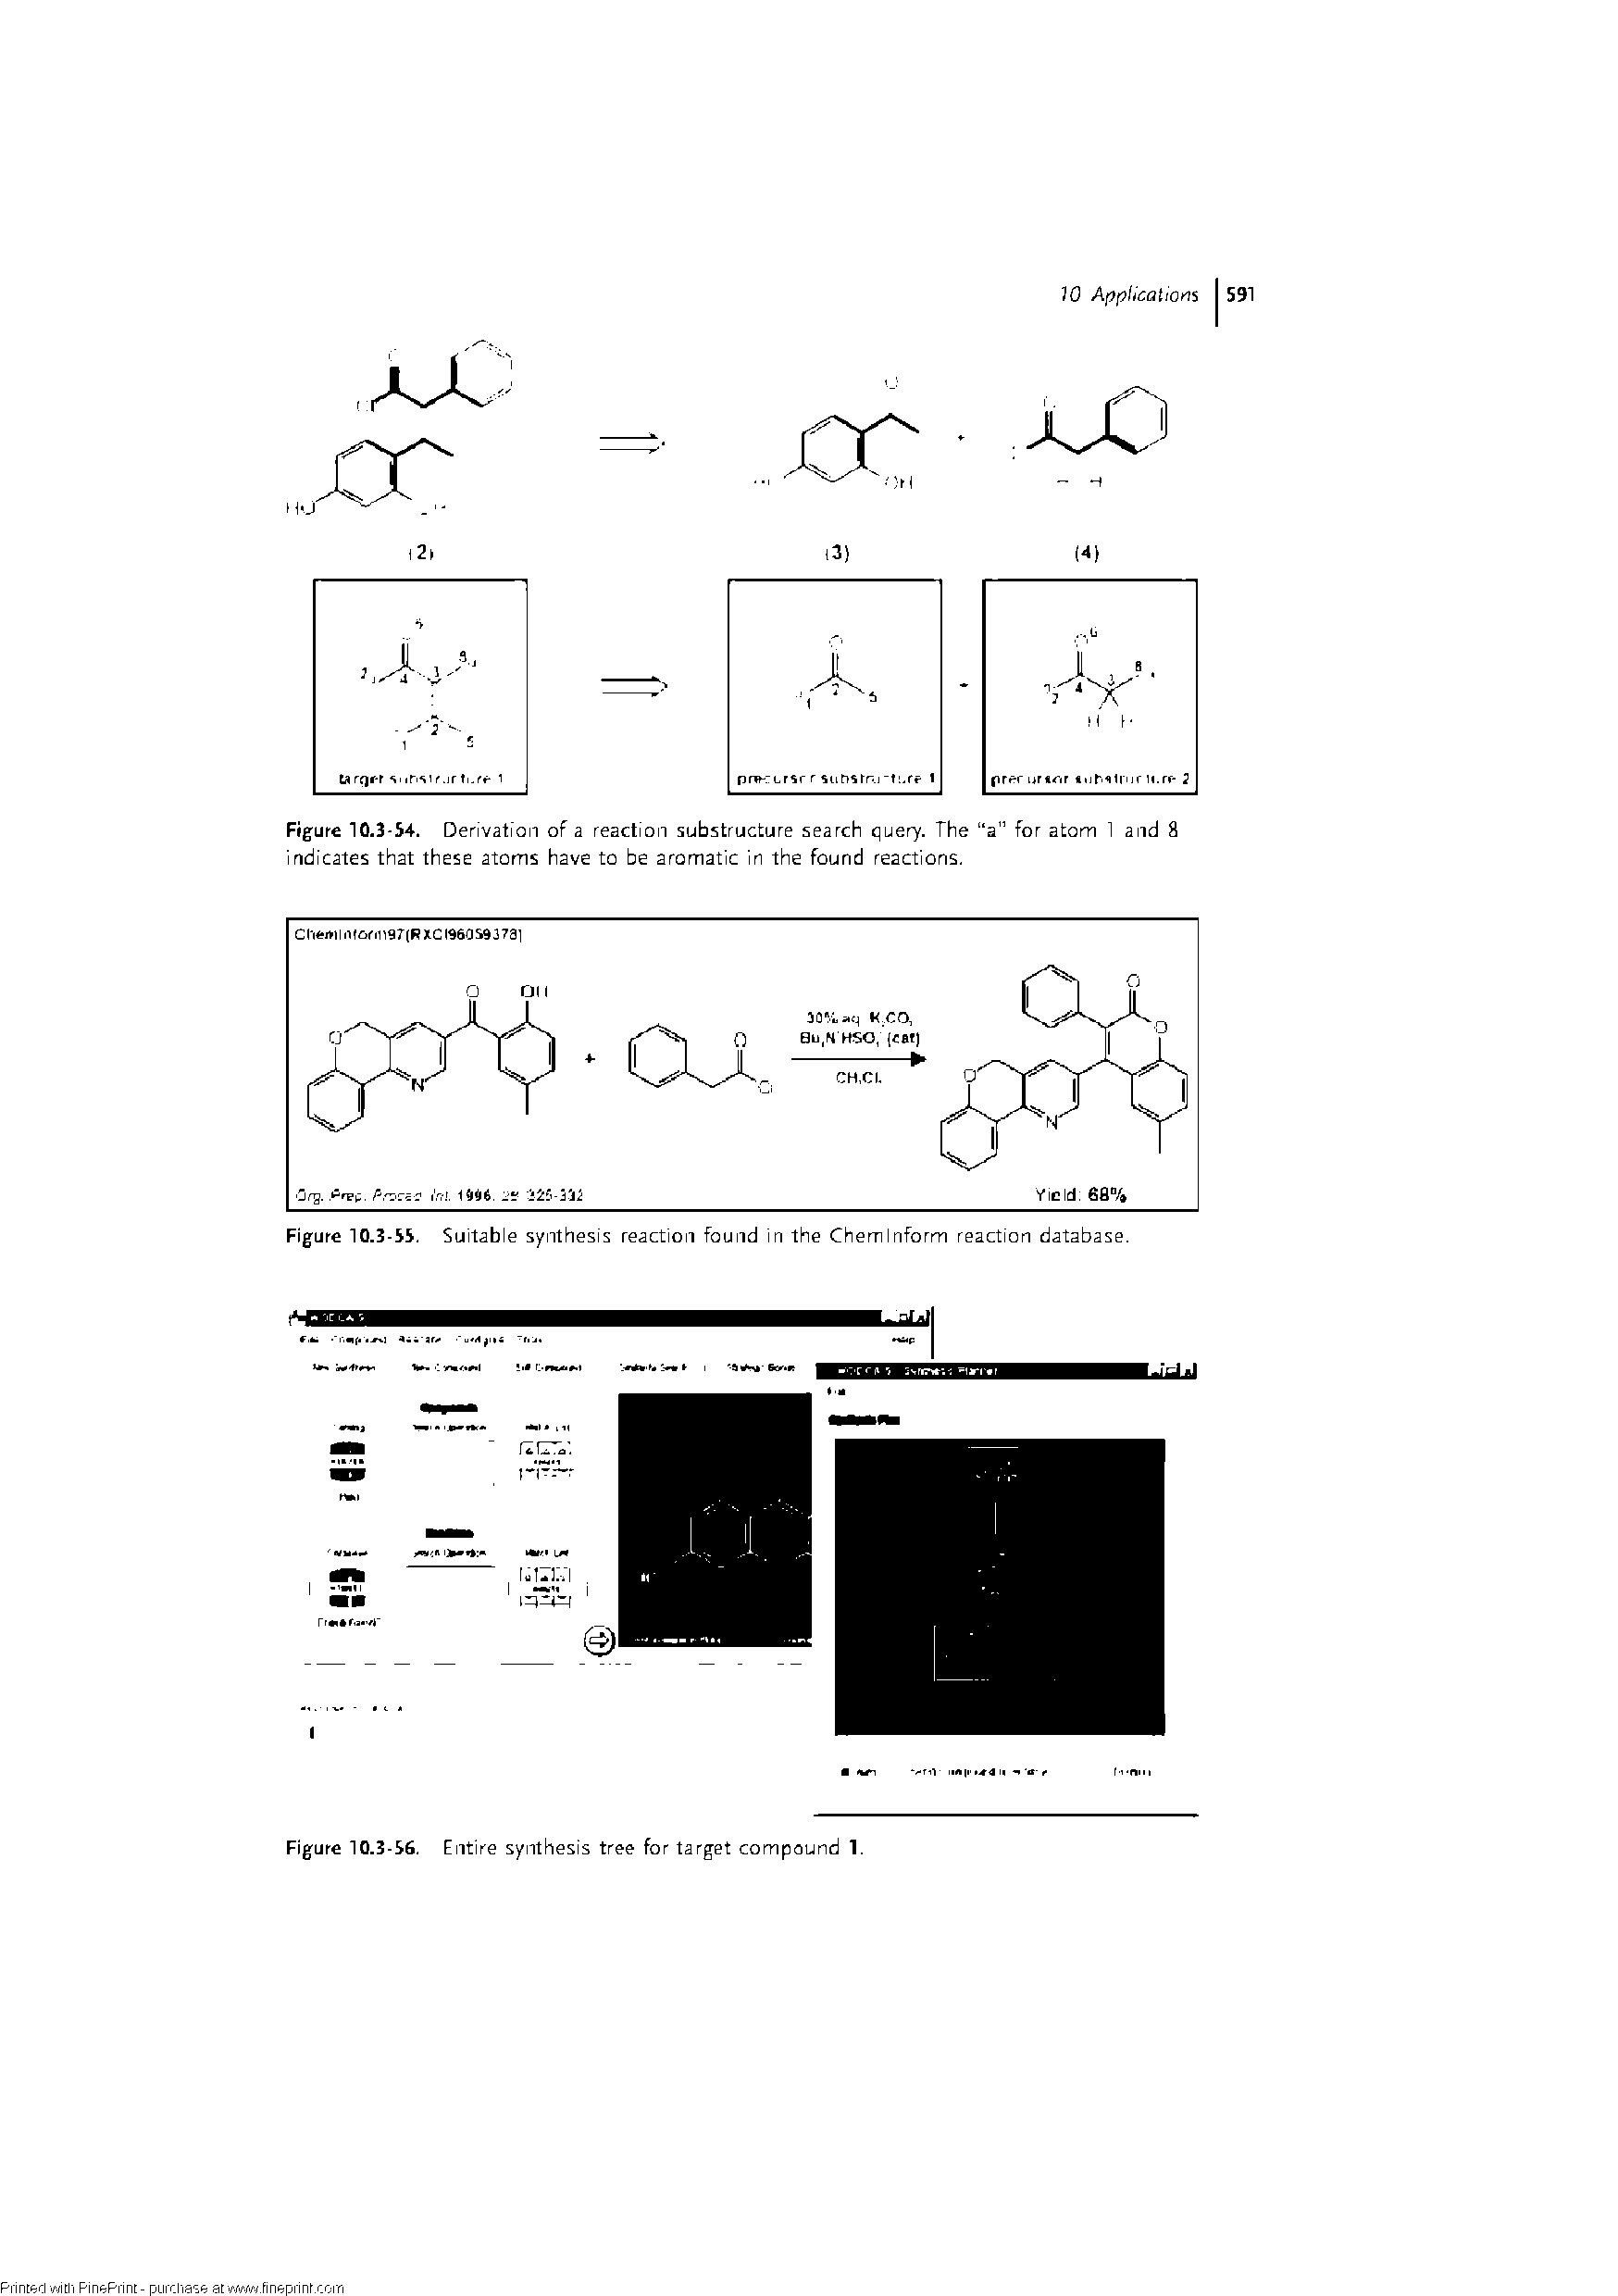 Figure 10.3-54. Derivation of a reaction substructure search query. The a" for atom 1 and 8 indicates that these atoms have to be aromatic in the found reactions.